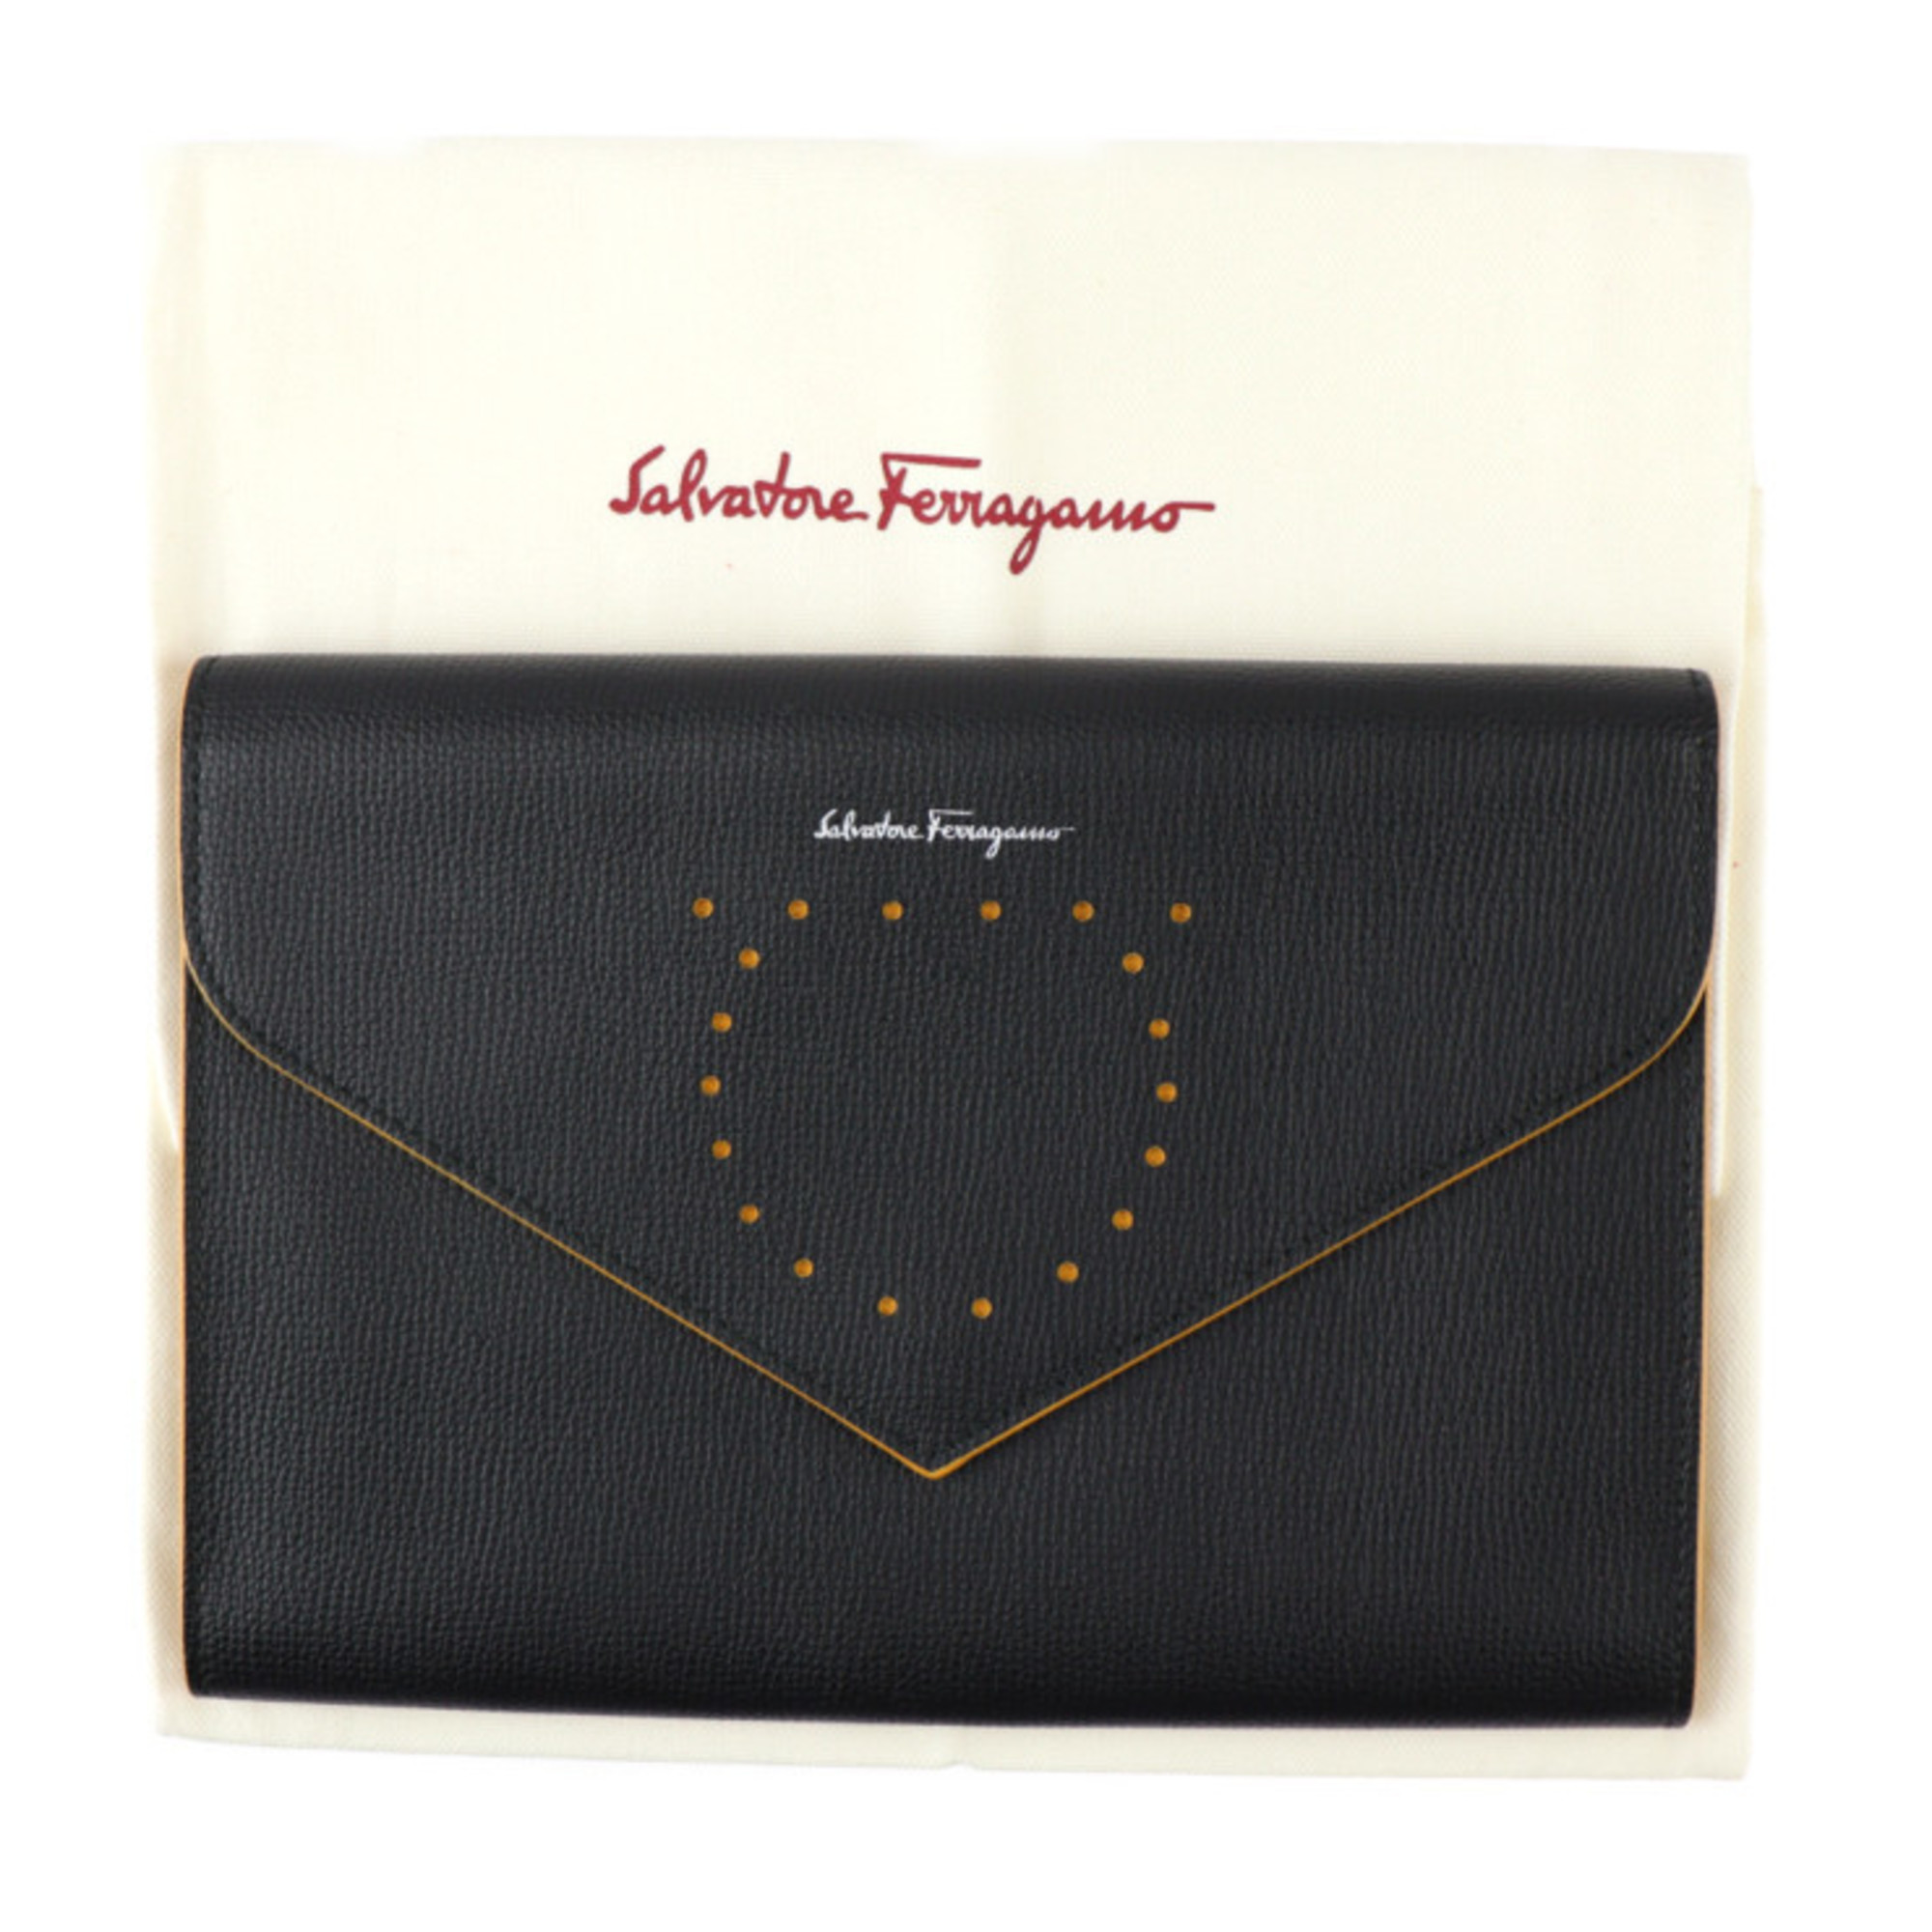 Salvatore Ferragamo Gancini clutch bag 22 D541 leather black bright yellow silver hardware tablet case multi second pouch tri-fold punching